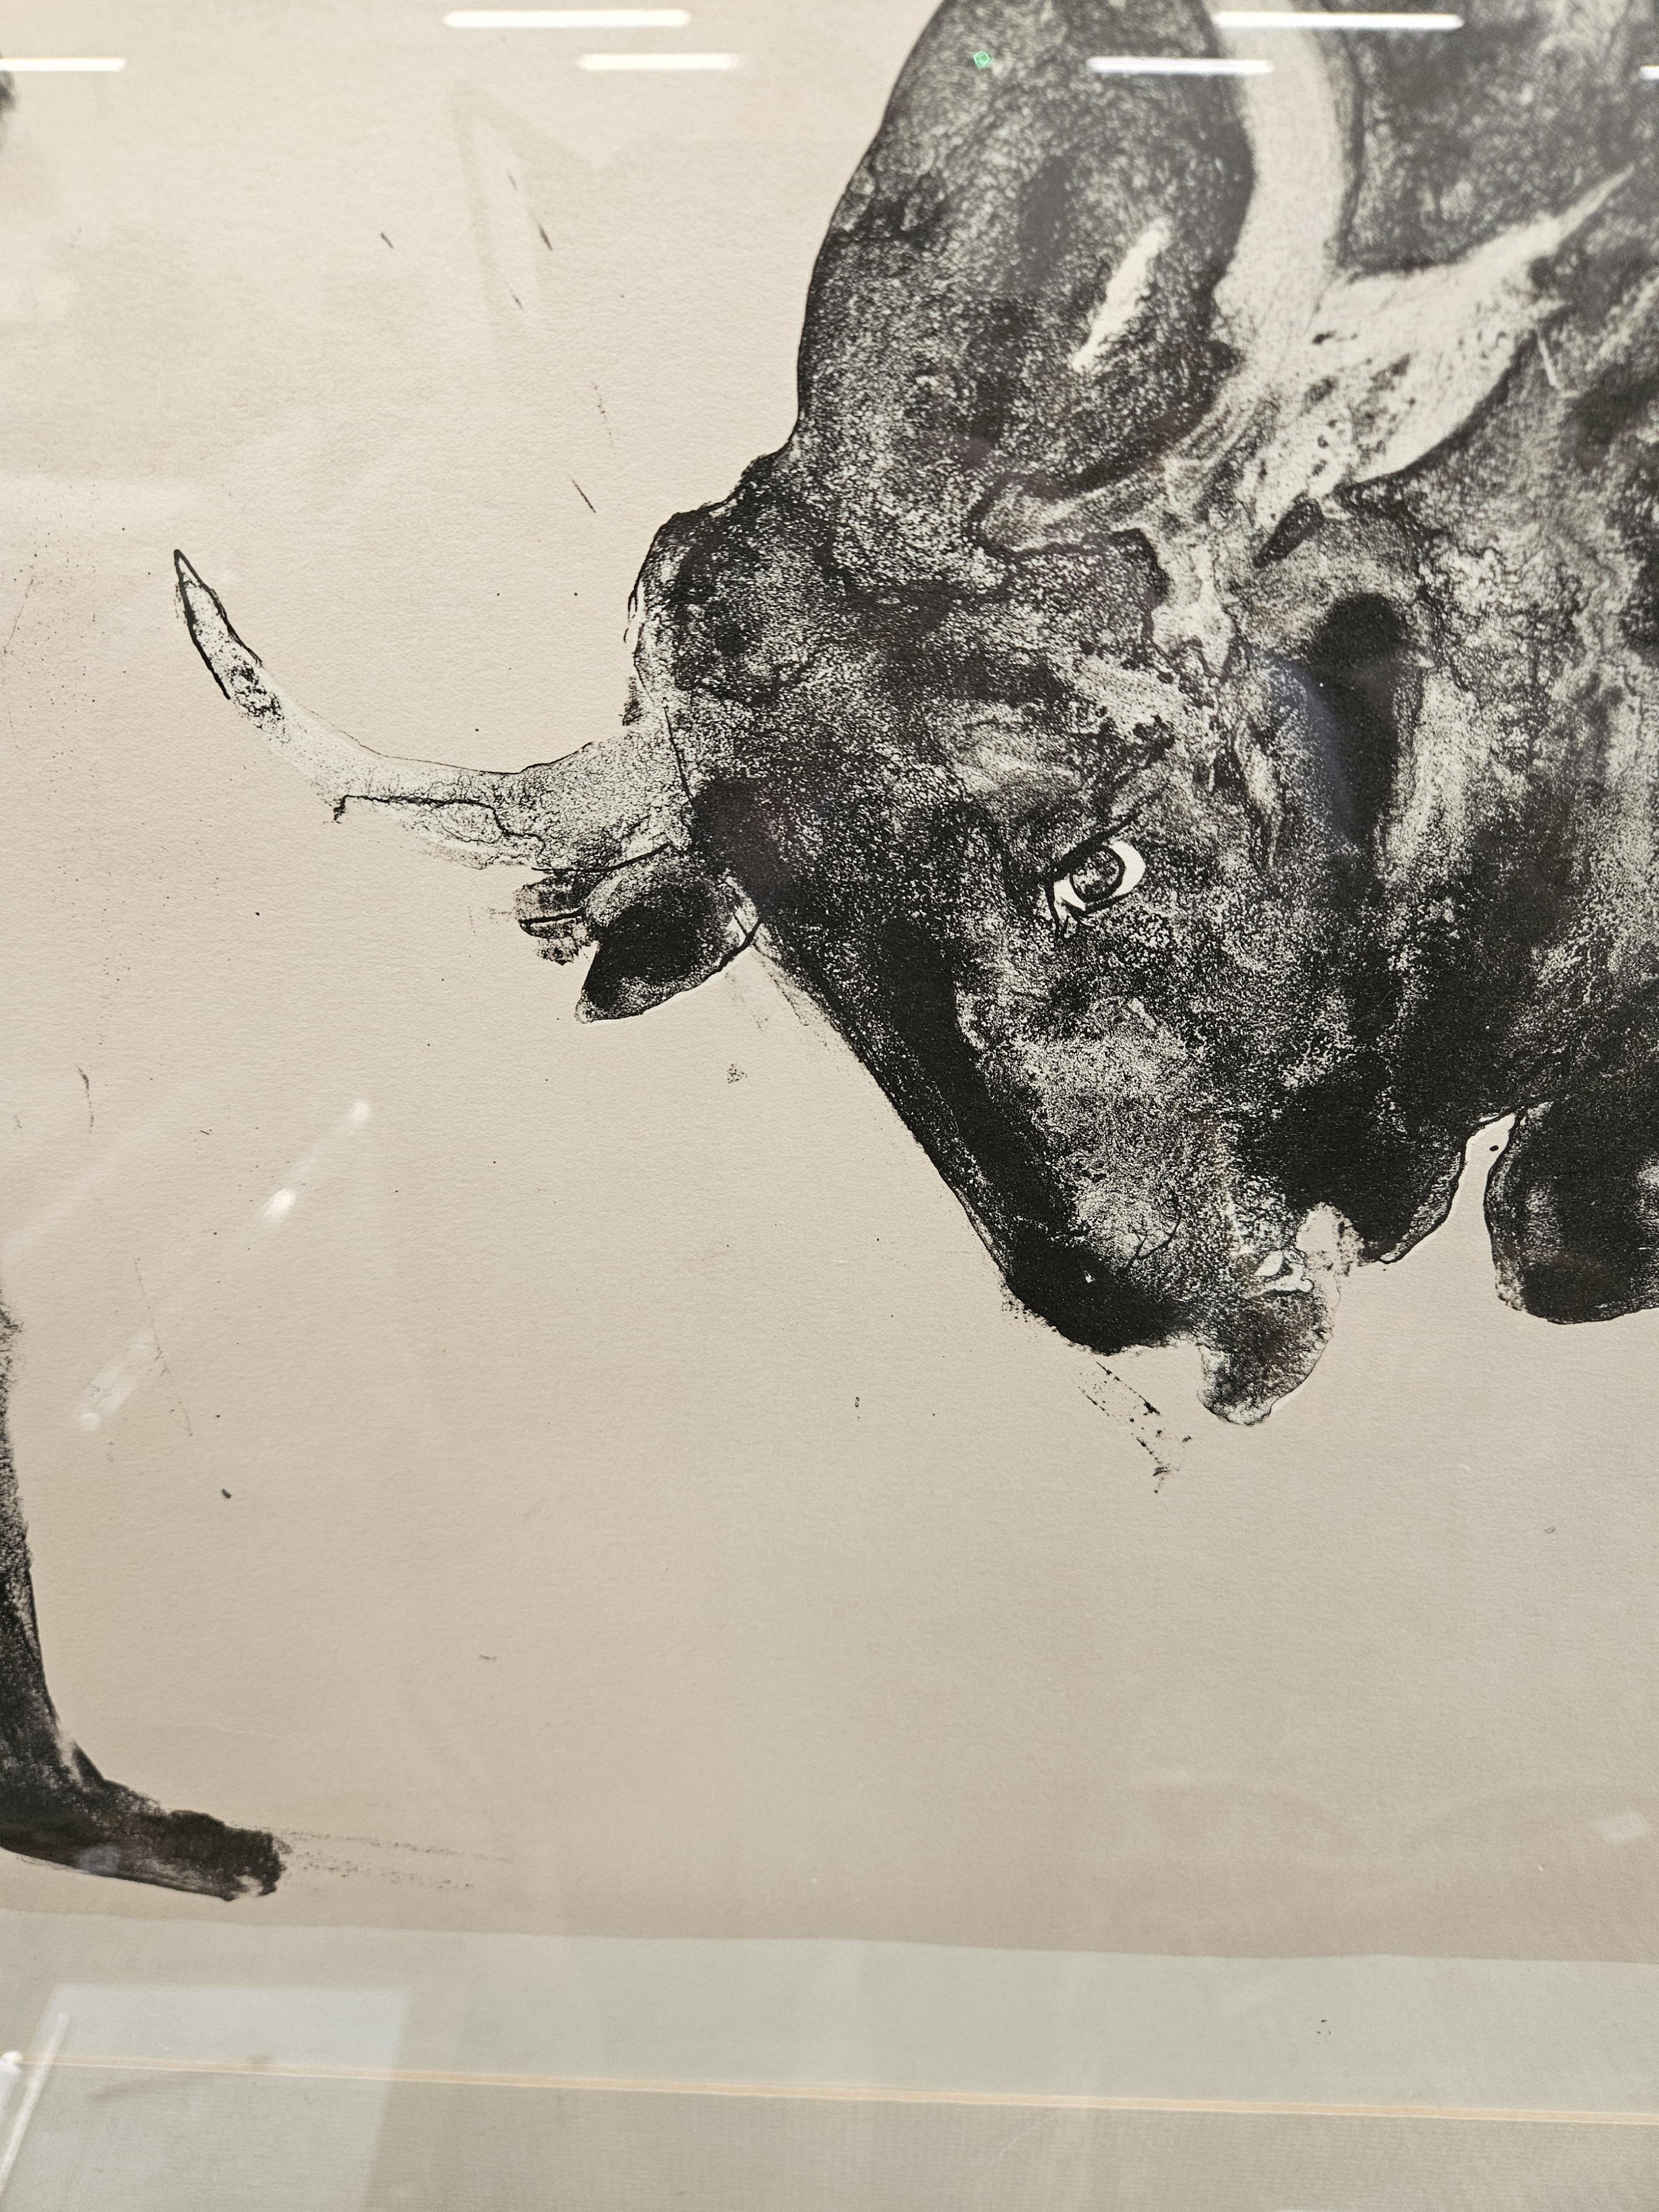 ELISABETH FRINK (1930-1993) ARR, CORRIDA FIVE, 1973, SIGNED IN PENCIL AND NUMBERED 32/72, 77x - Image 12 of 19